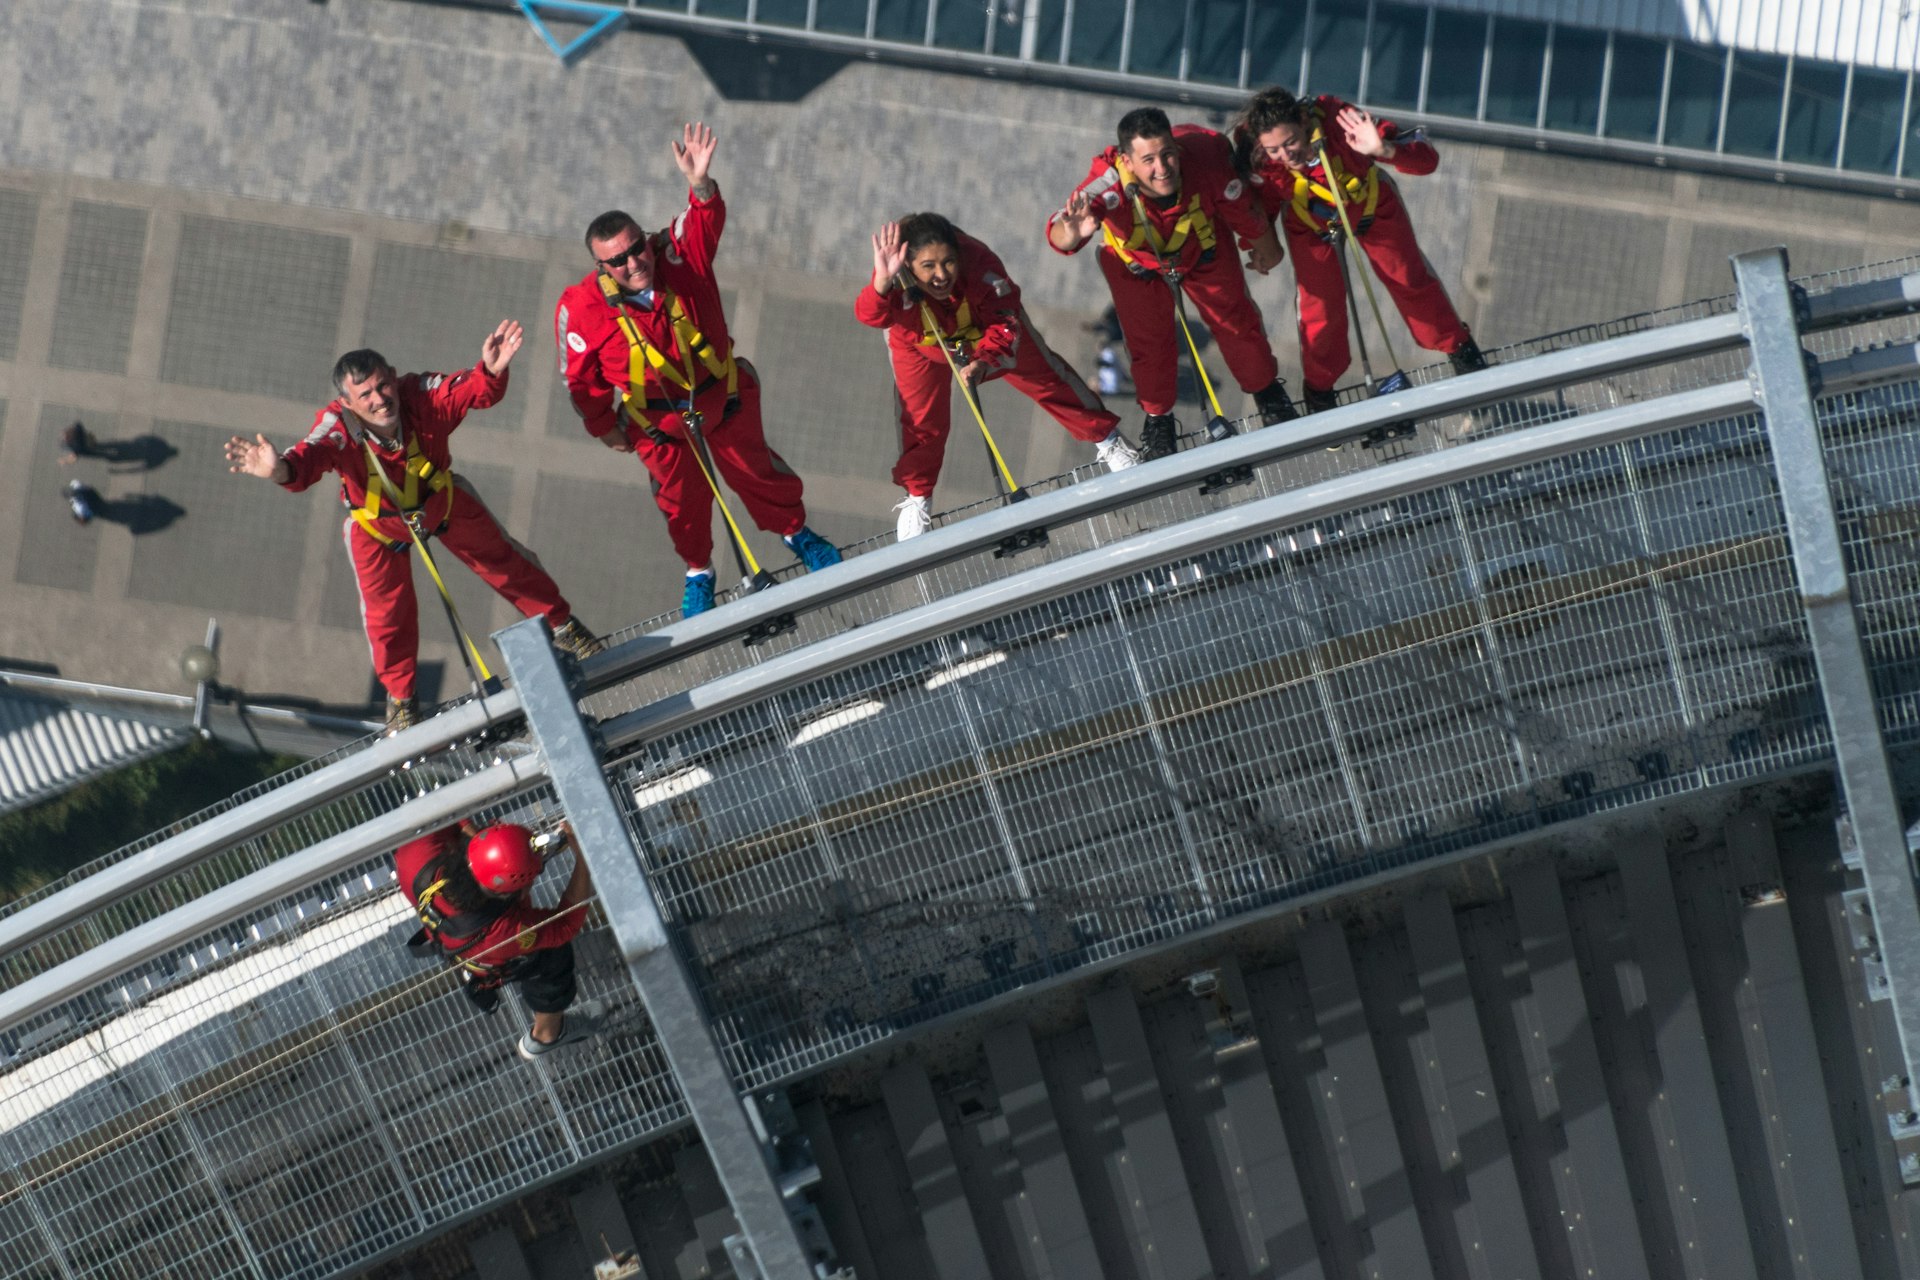 People in matching red jumpsuits dangle over the edge of a very tall building secured by yellow harnesses